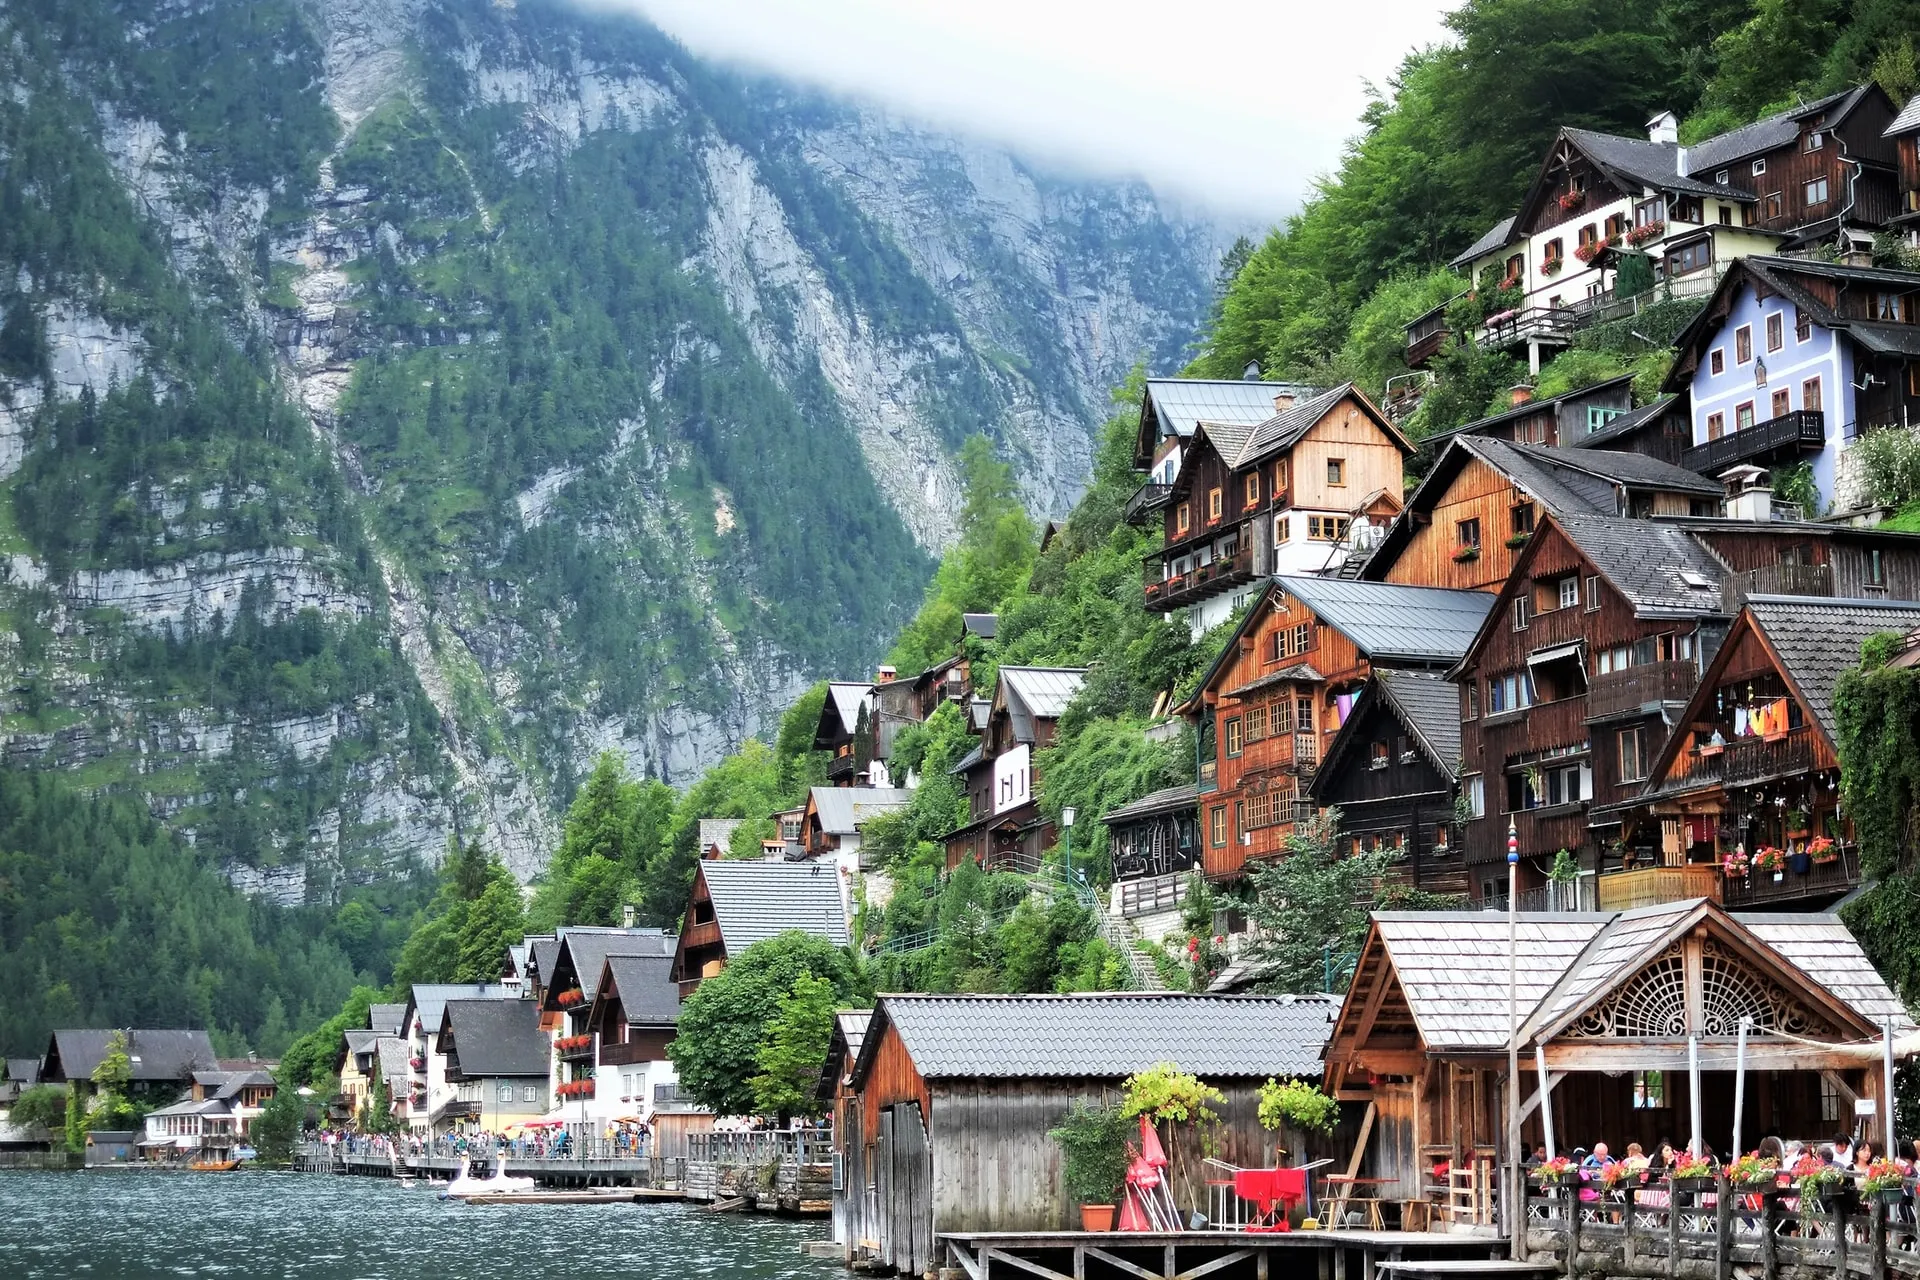 the famous lake of Hallstatt in Austria, a mesmerizing view of the village and the lake